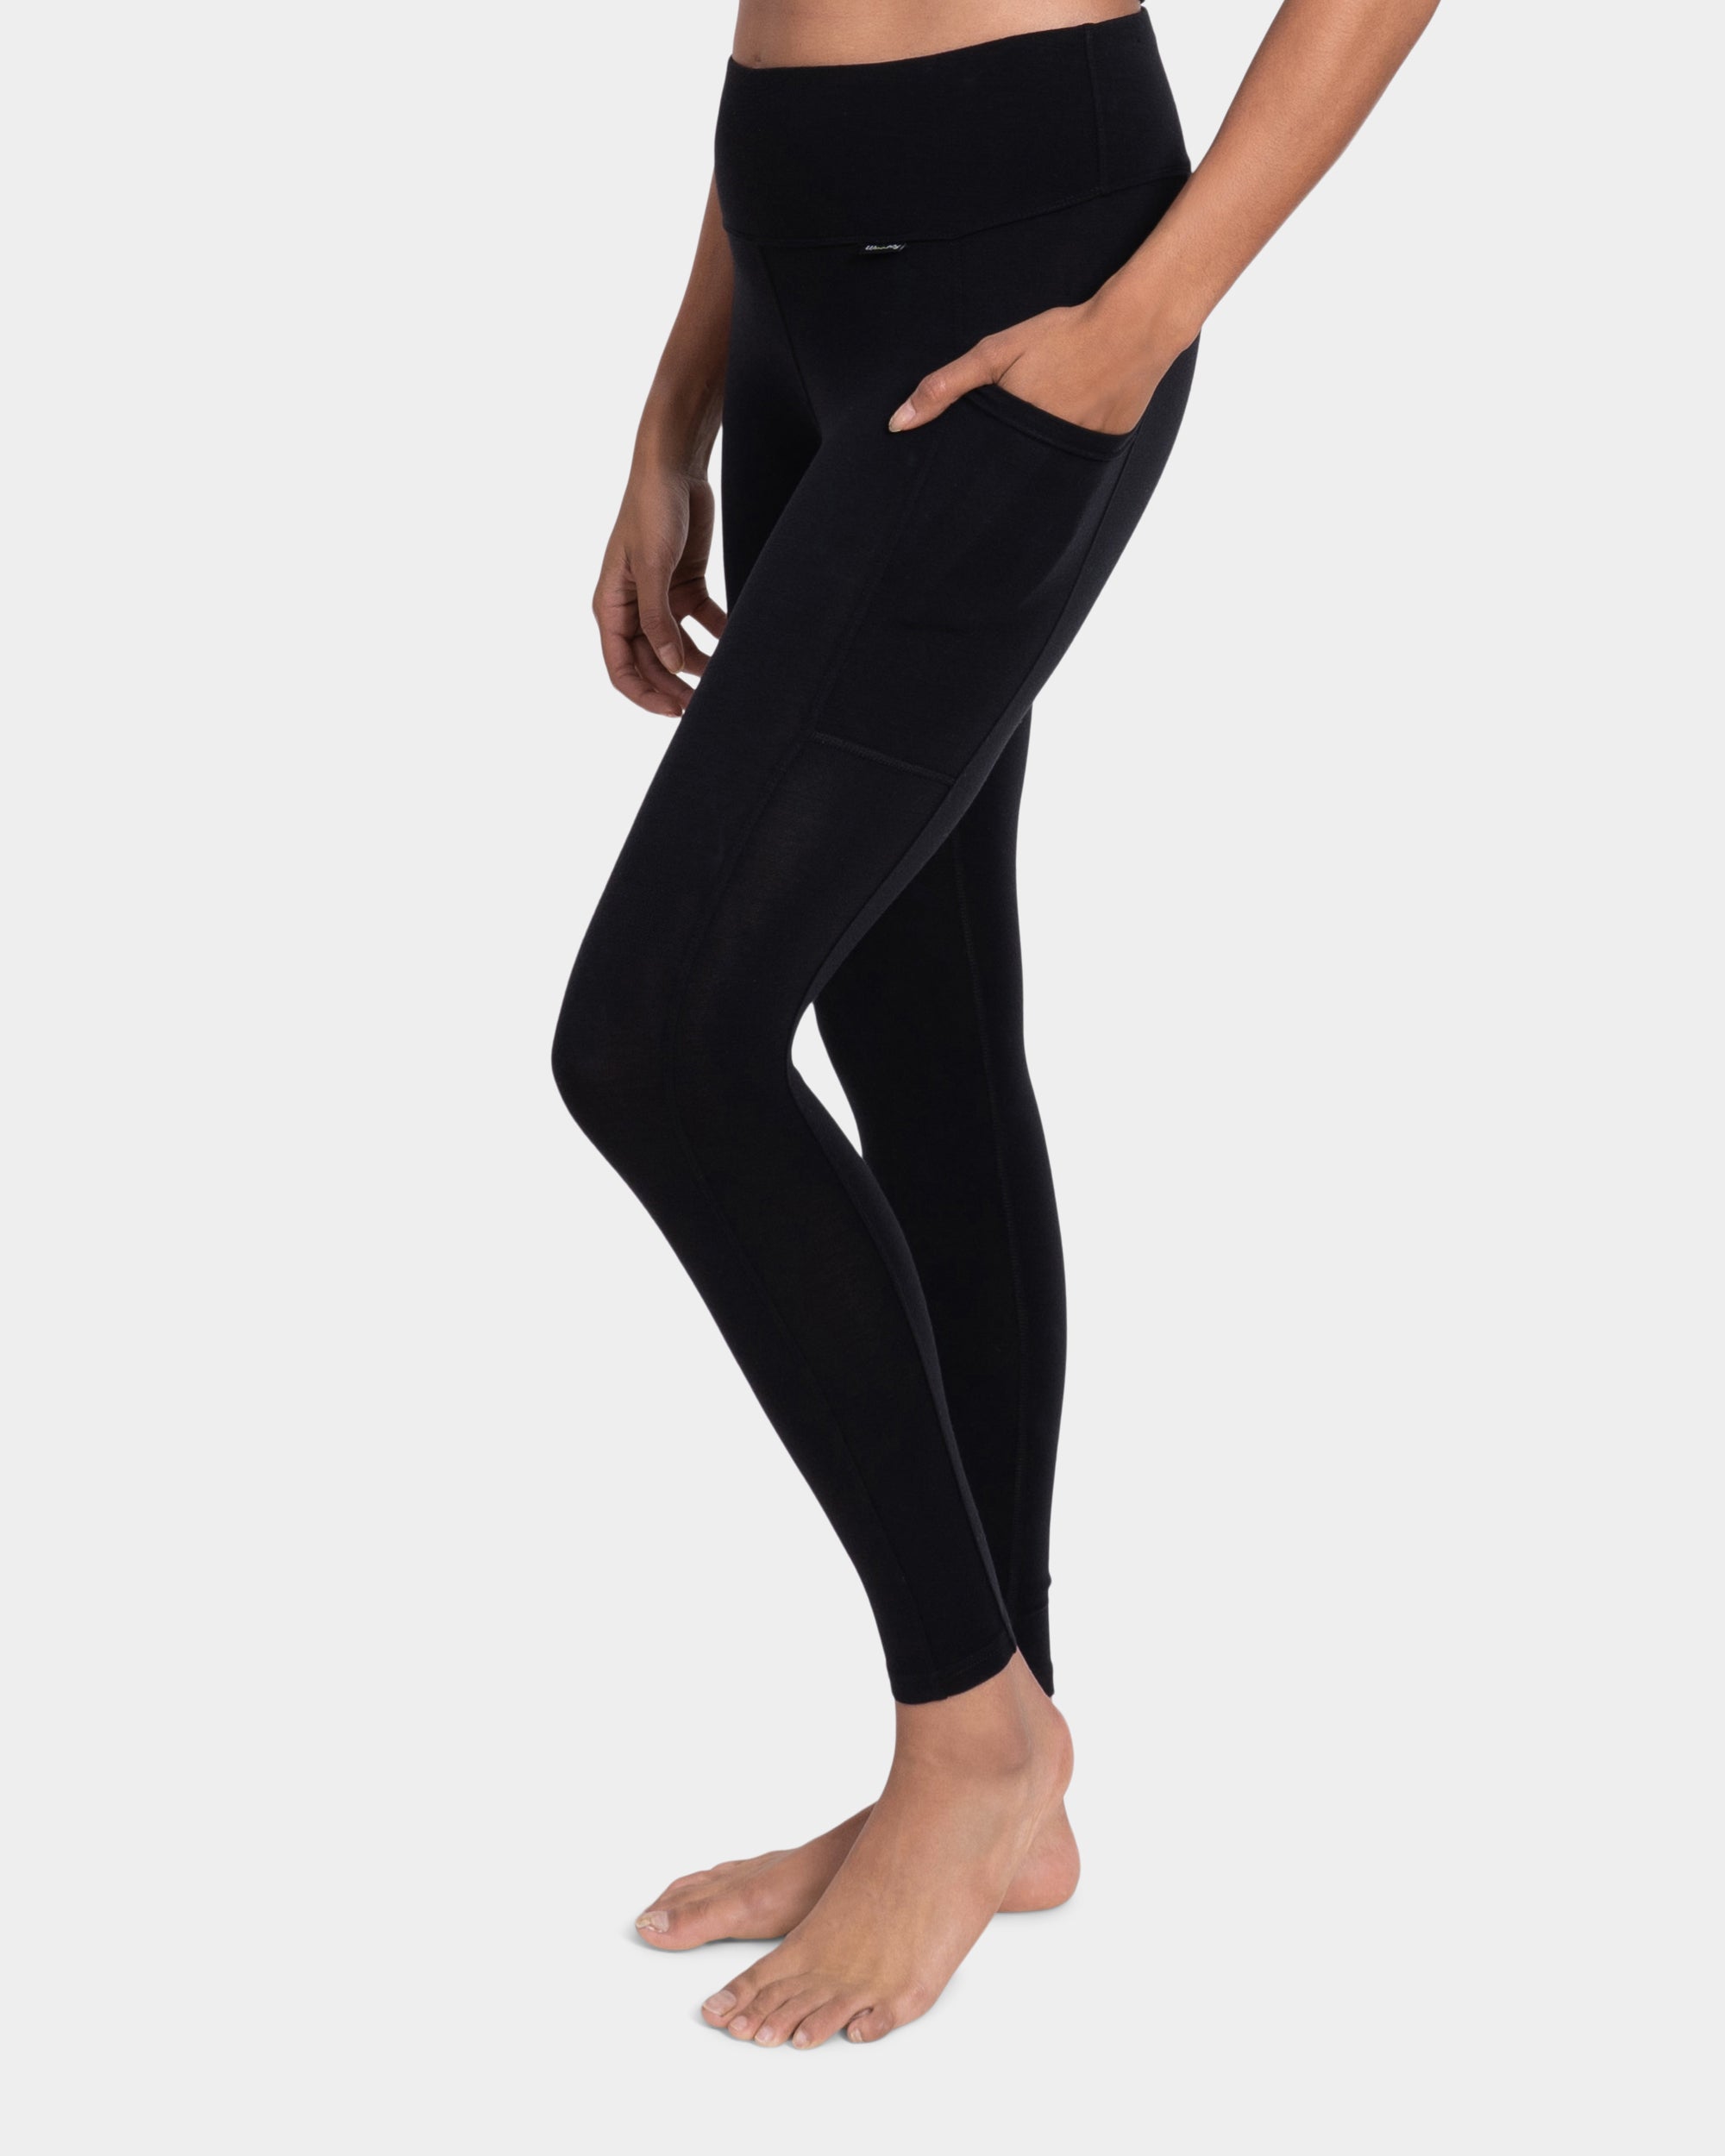 Leggings With Pockets for Women | Comfort & Style in One Package | Felina